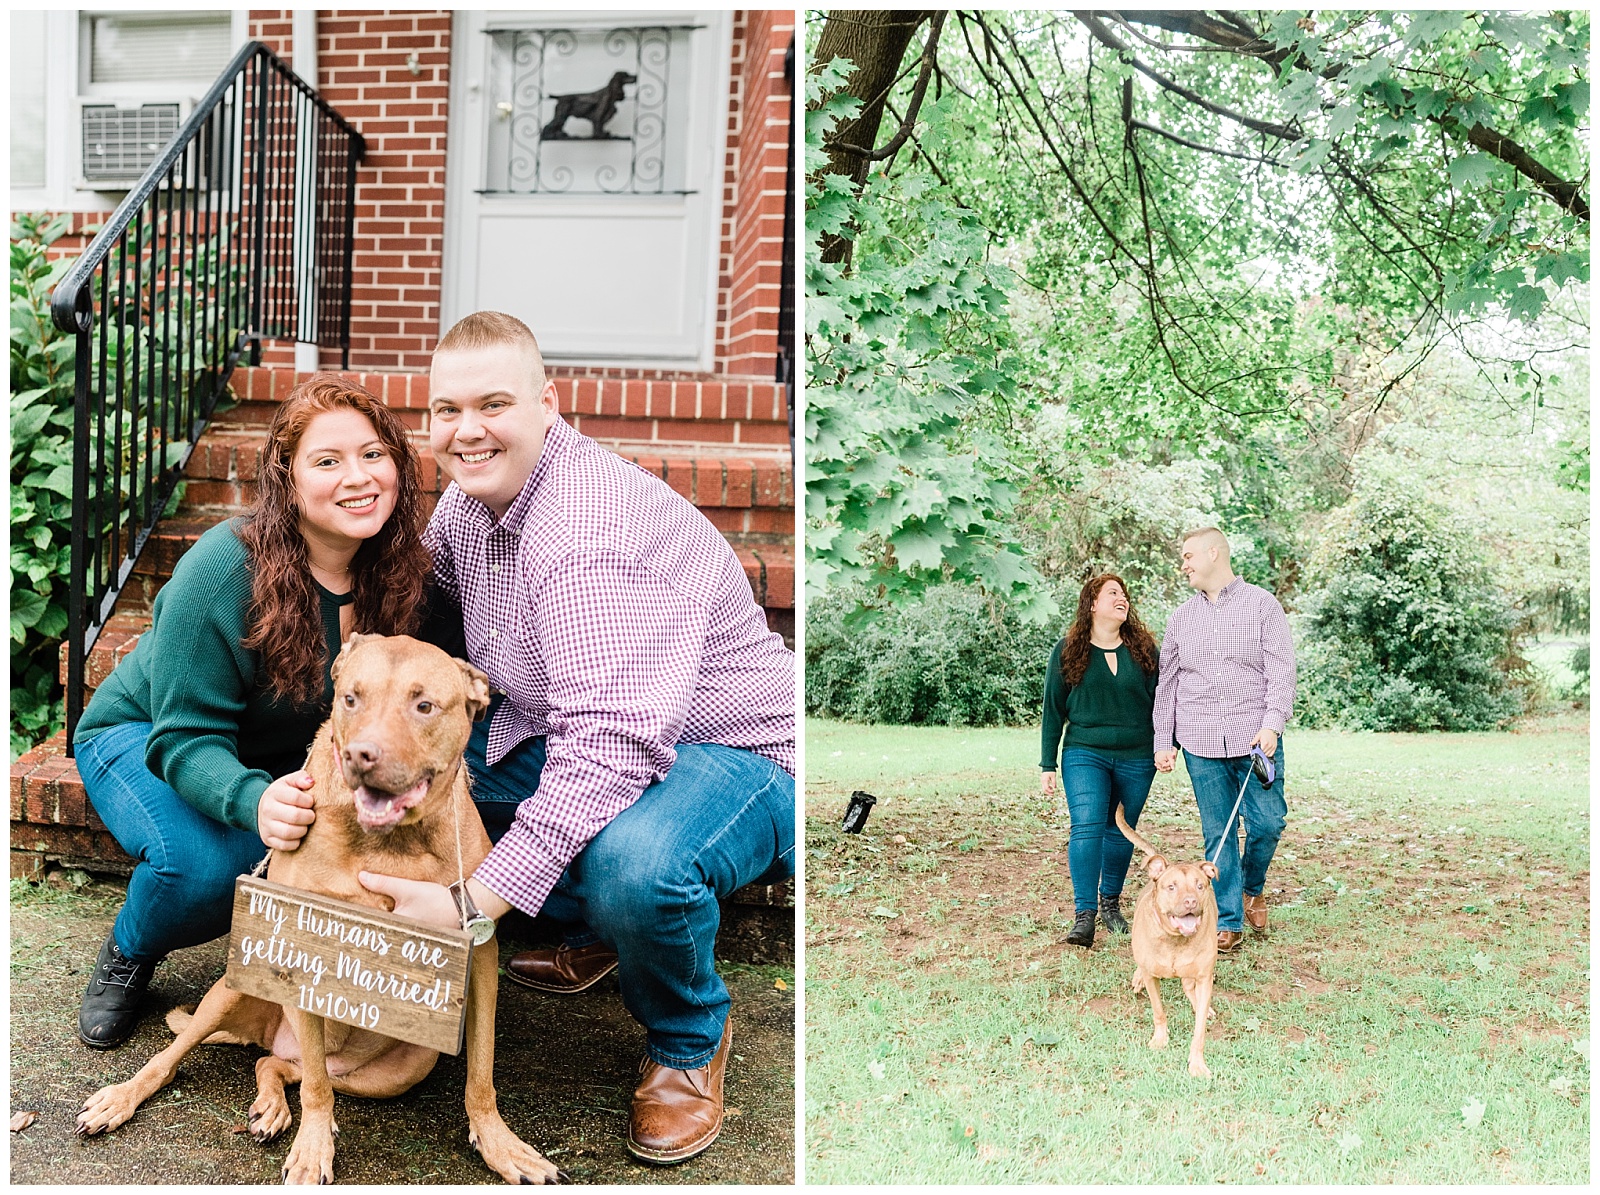 Autumn,Dog,Engagement Session,Fall,Humans are Getting Married,Mohonk Mountain House,NY,New Paltz,Pup,Wedding Photographer,